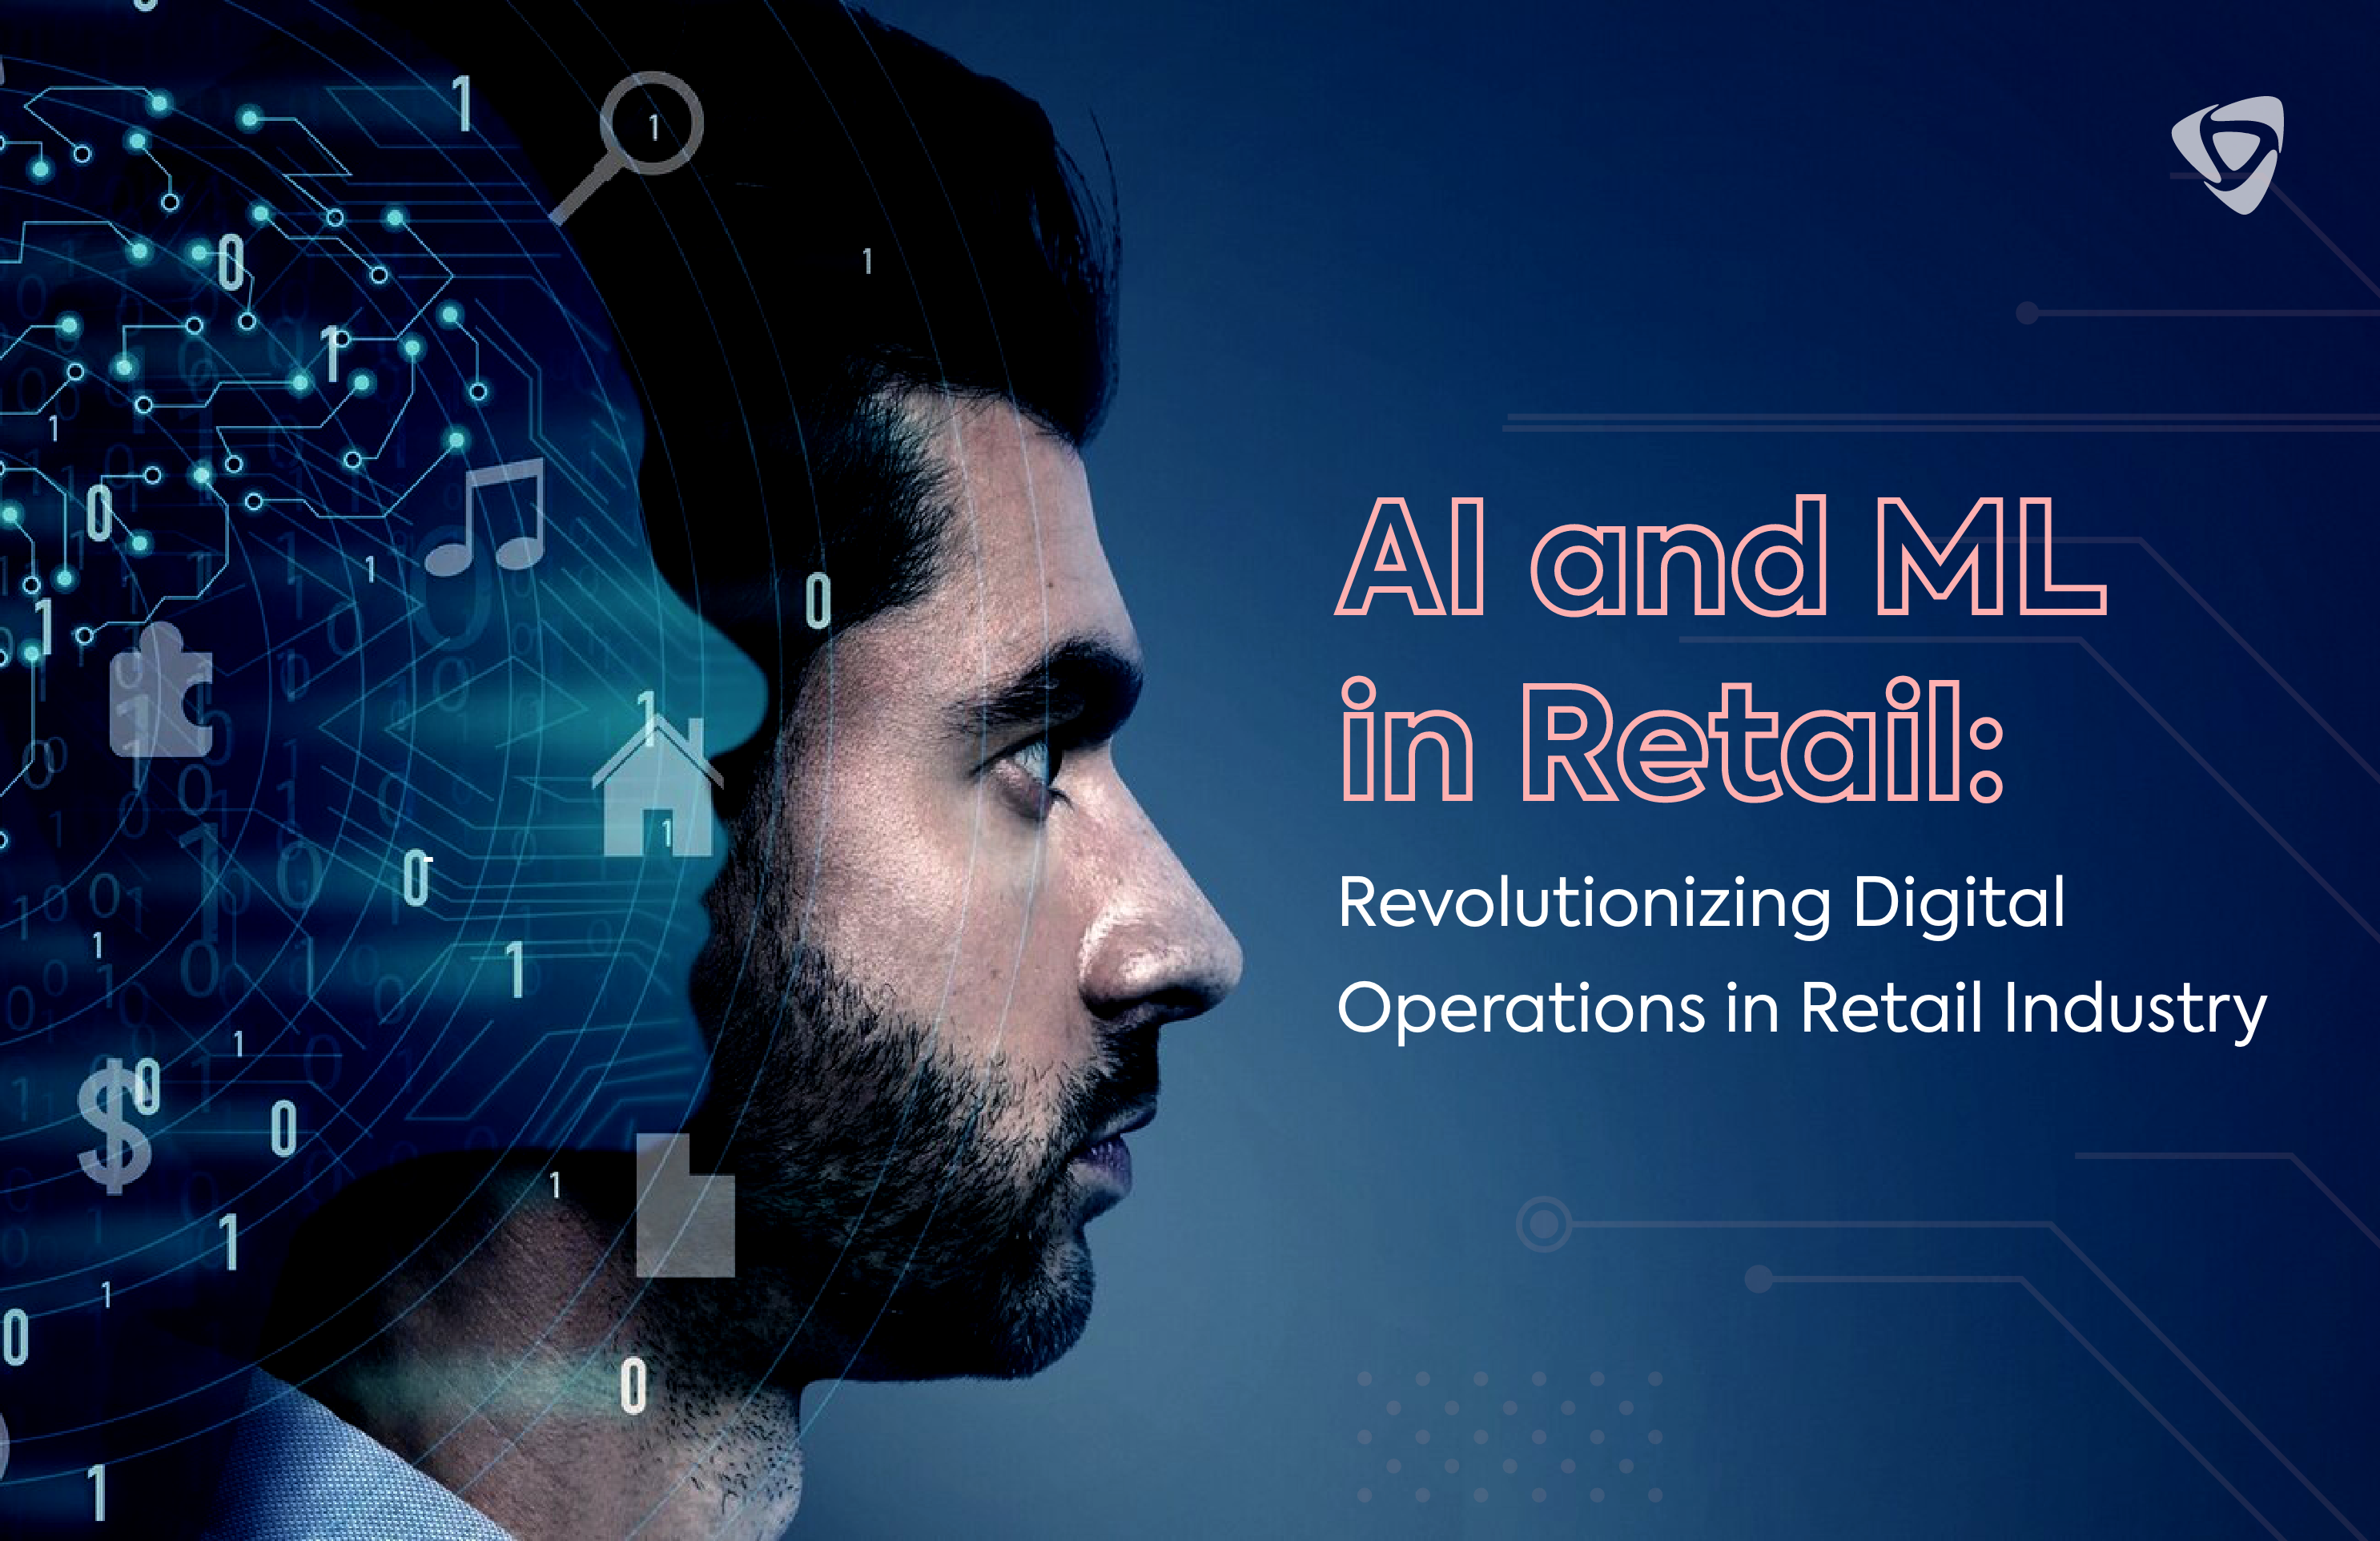 AI and ML in Retail: Revolutionizing Digital Operations in Retail Industry